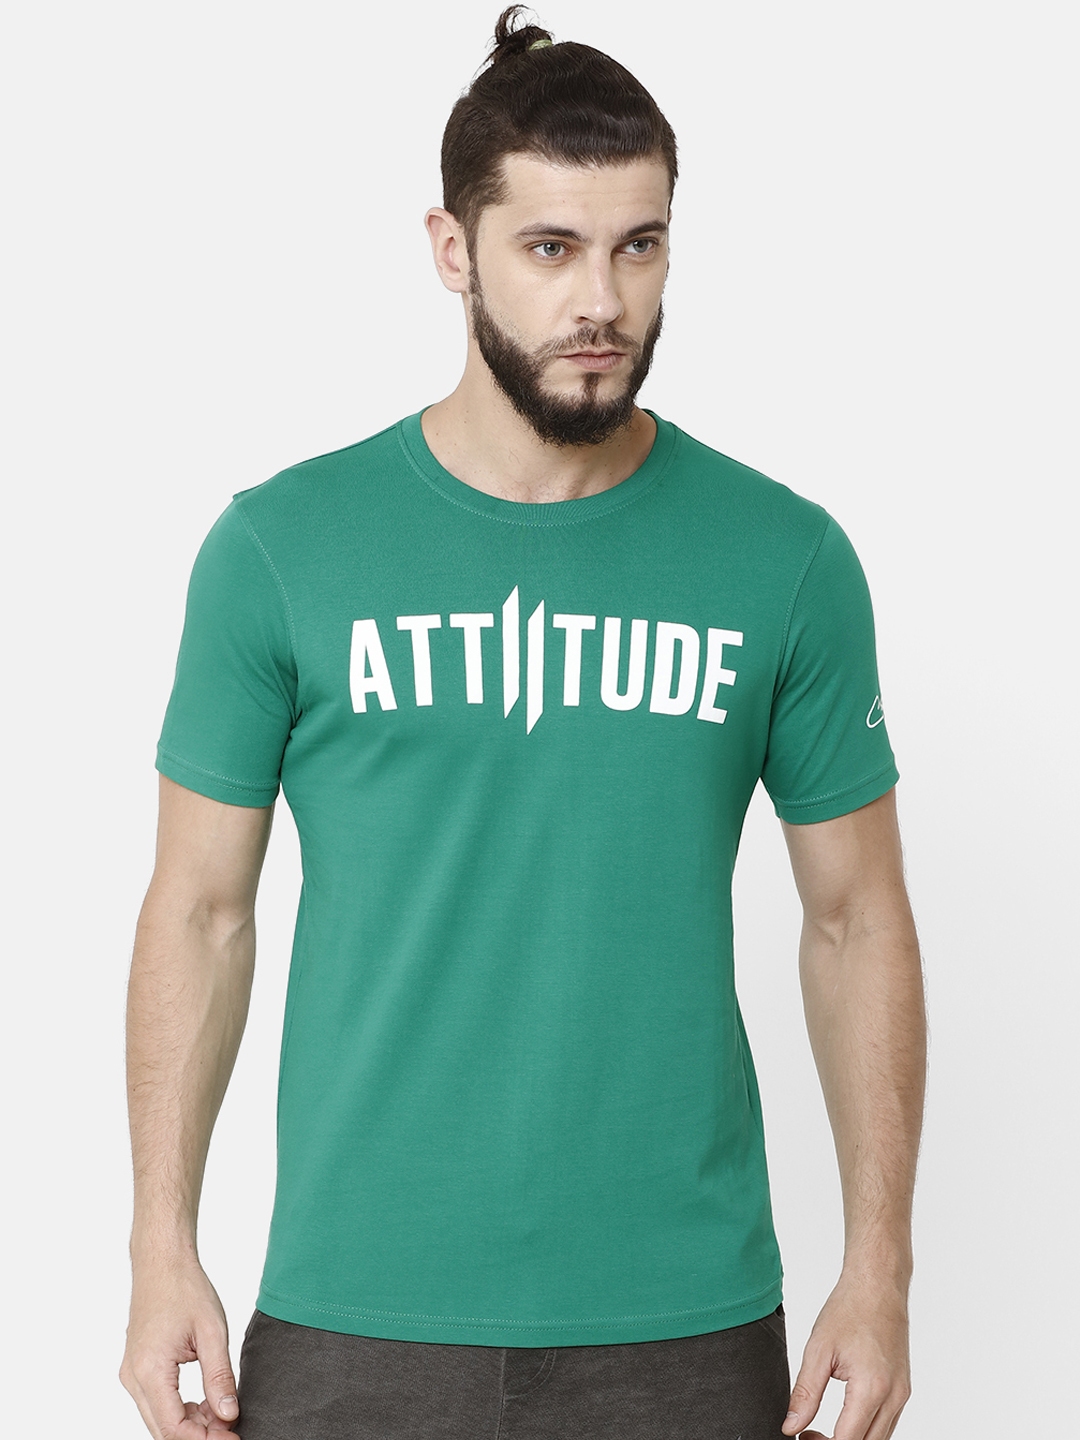 Buy Attiitude Men Green Printed Round Neck Pure Cotton Slim Fit T Shirt Tshirts For Men 7399